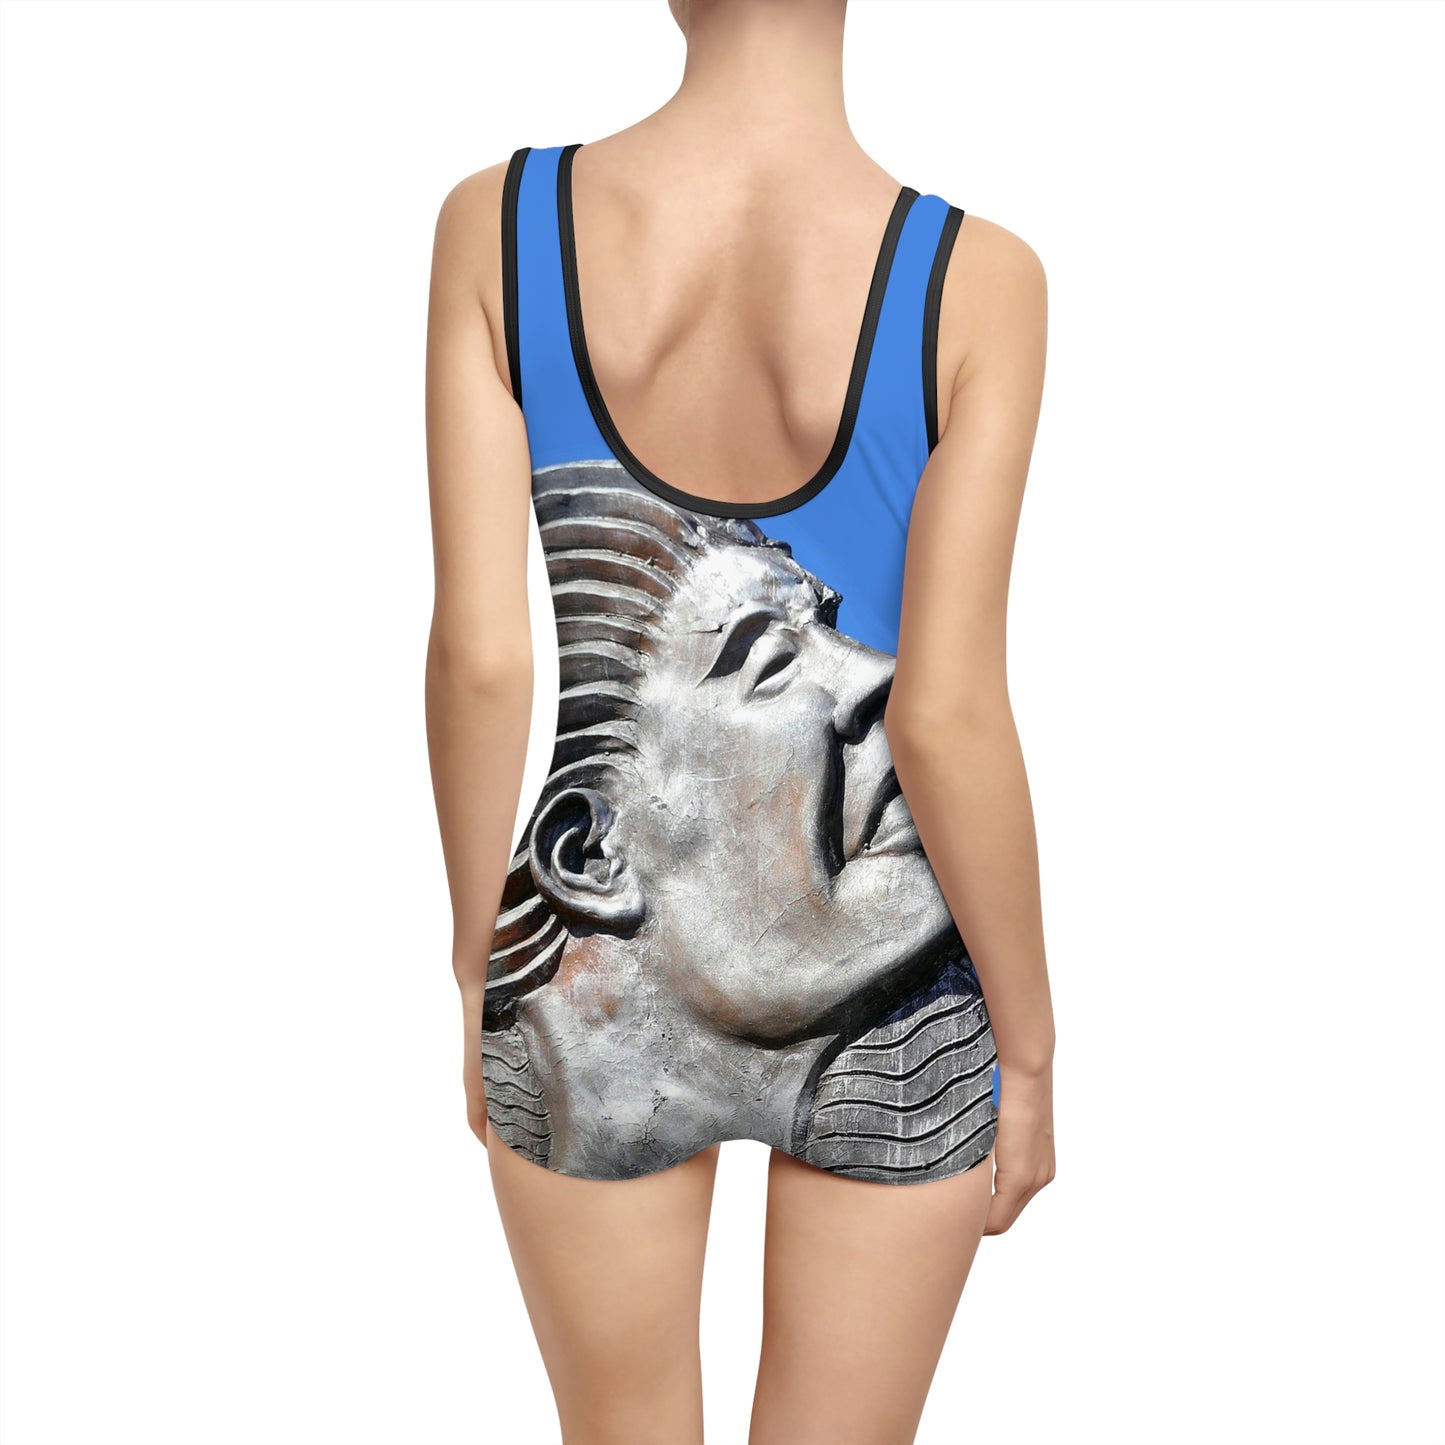 Nymph Beauty - Women's Vintage Swimsuit - Fry1Productions